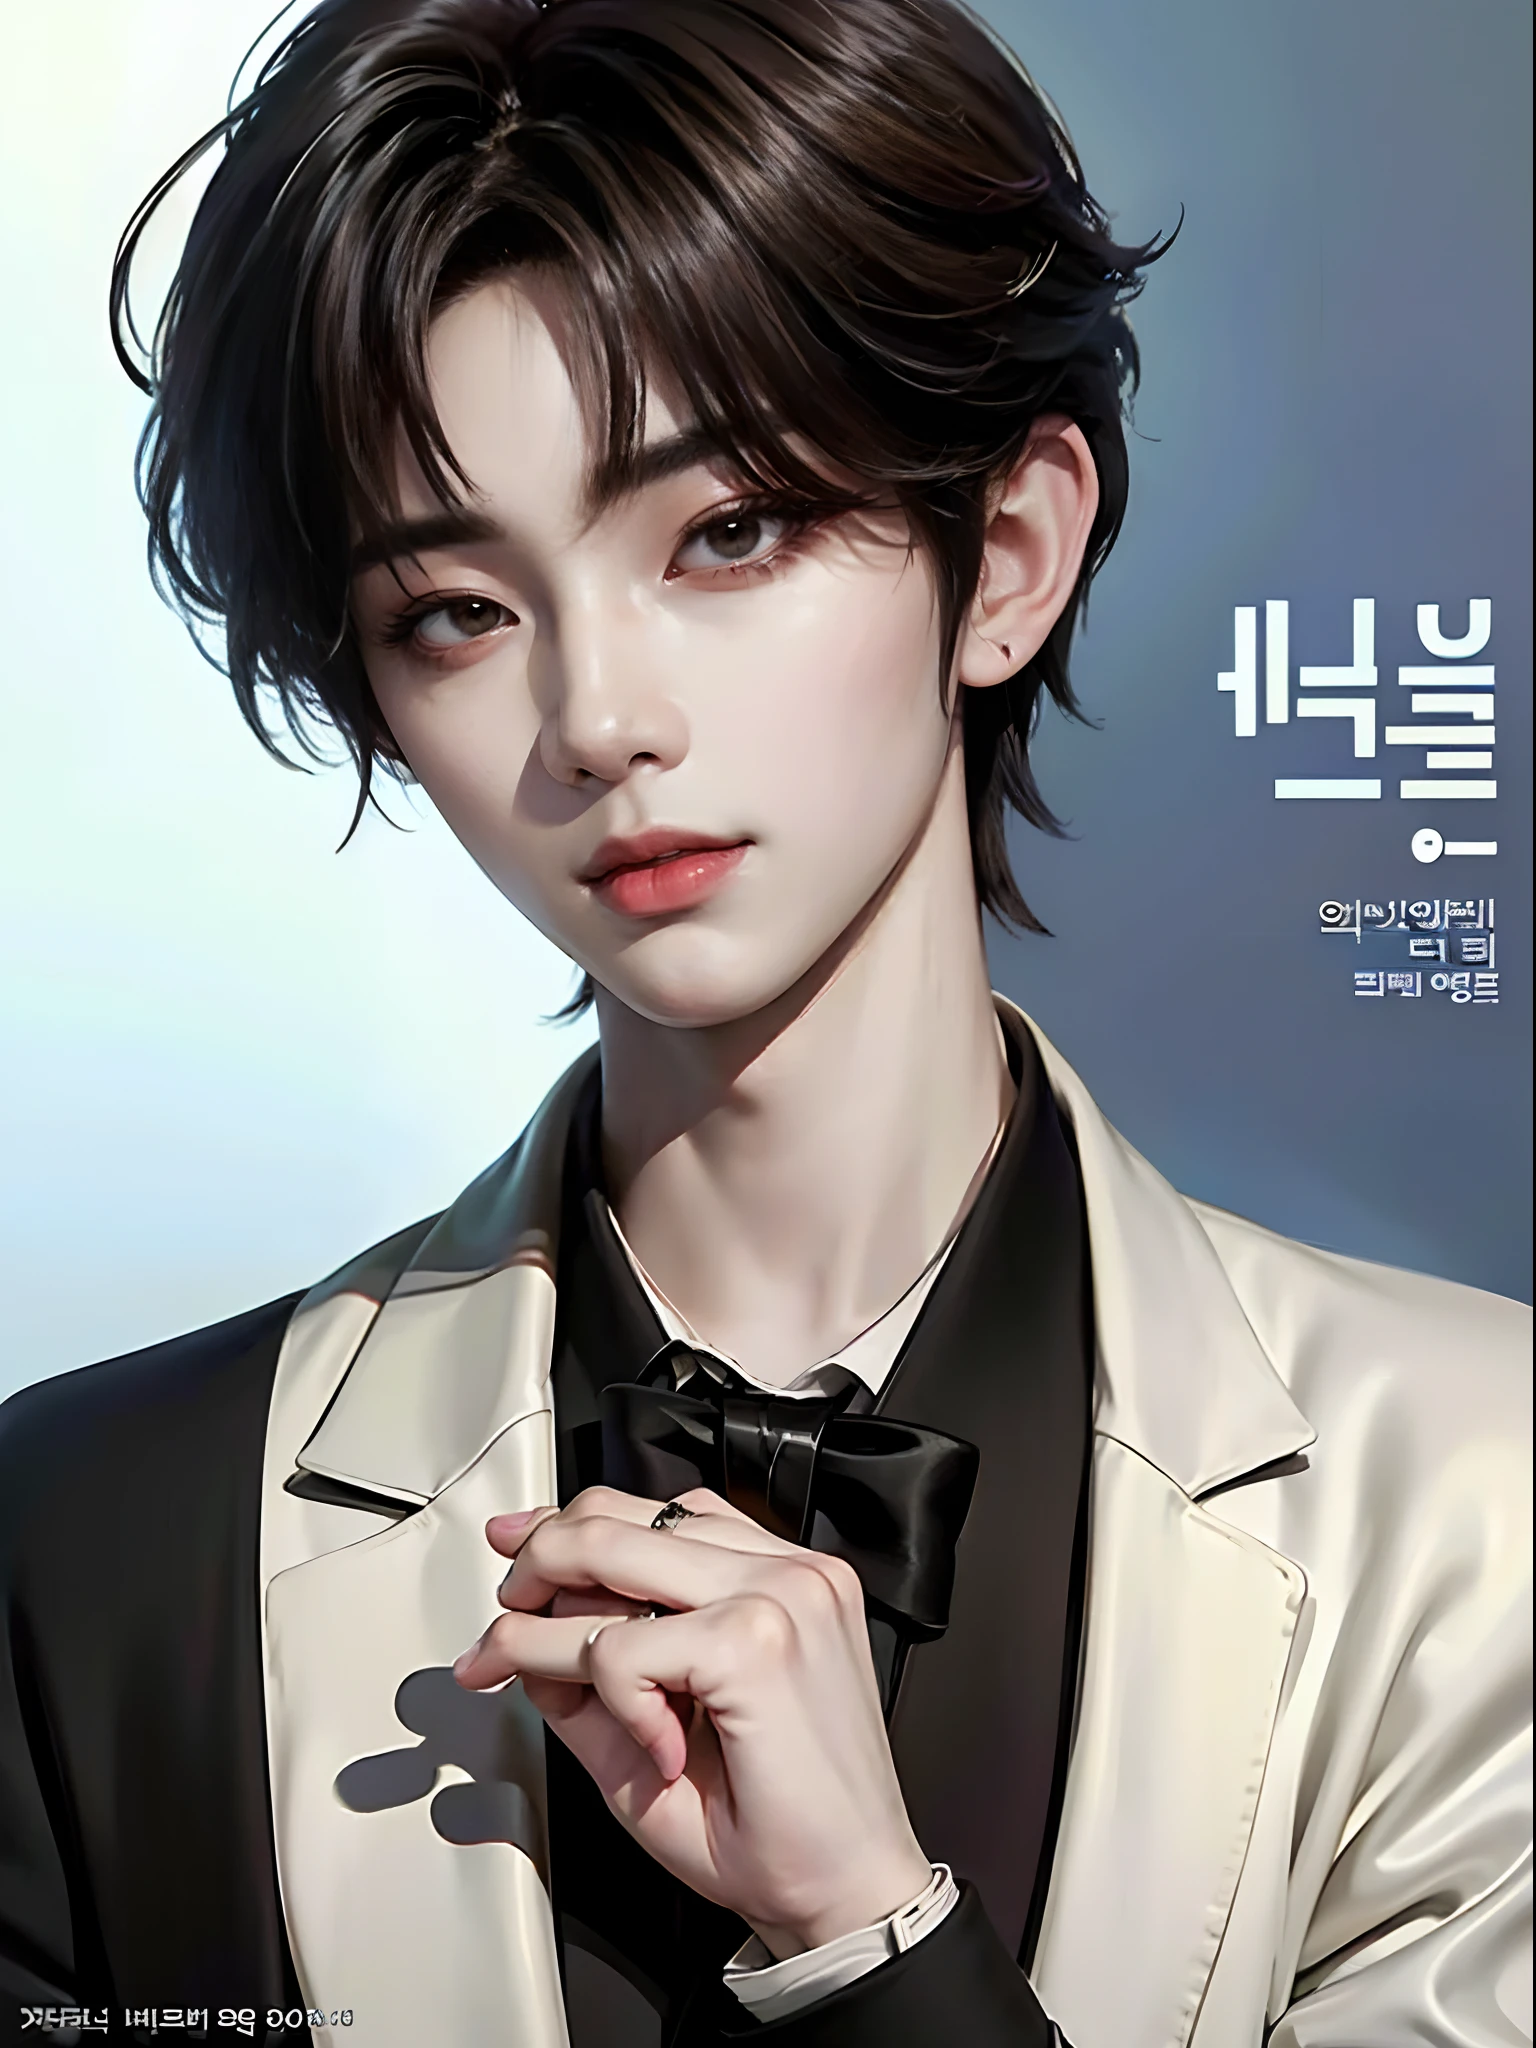 ((4K works))、​masterpiece、（top-quality)、((high-level image quality))、((One Manly Boy))、Slim body、((Man in black tuxedo))、(Detailed beautiful eyeodel Magazines))、deacon、Face similar to Chaewon in Ruseraphim、((short hair above the ears))、((Smaller face))、((Neutral face))、((Light brown eyes))、((Korean boy))、((18year old))、((Handsome man))、((A charming expression))、((Korean Makeup))、((elongated and sharp eyes))、((Focus zoom out))、((Model Magazine Cover))、((model poseodel photo))、((Butler photo))、Professional Photoagazine covers))、((Shot alone))、((Upper body photography))